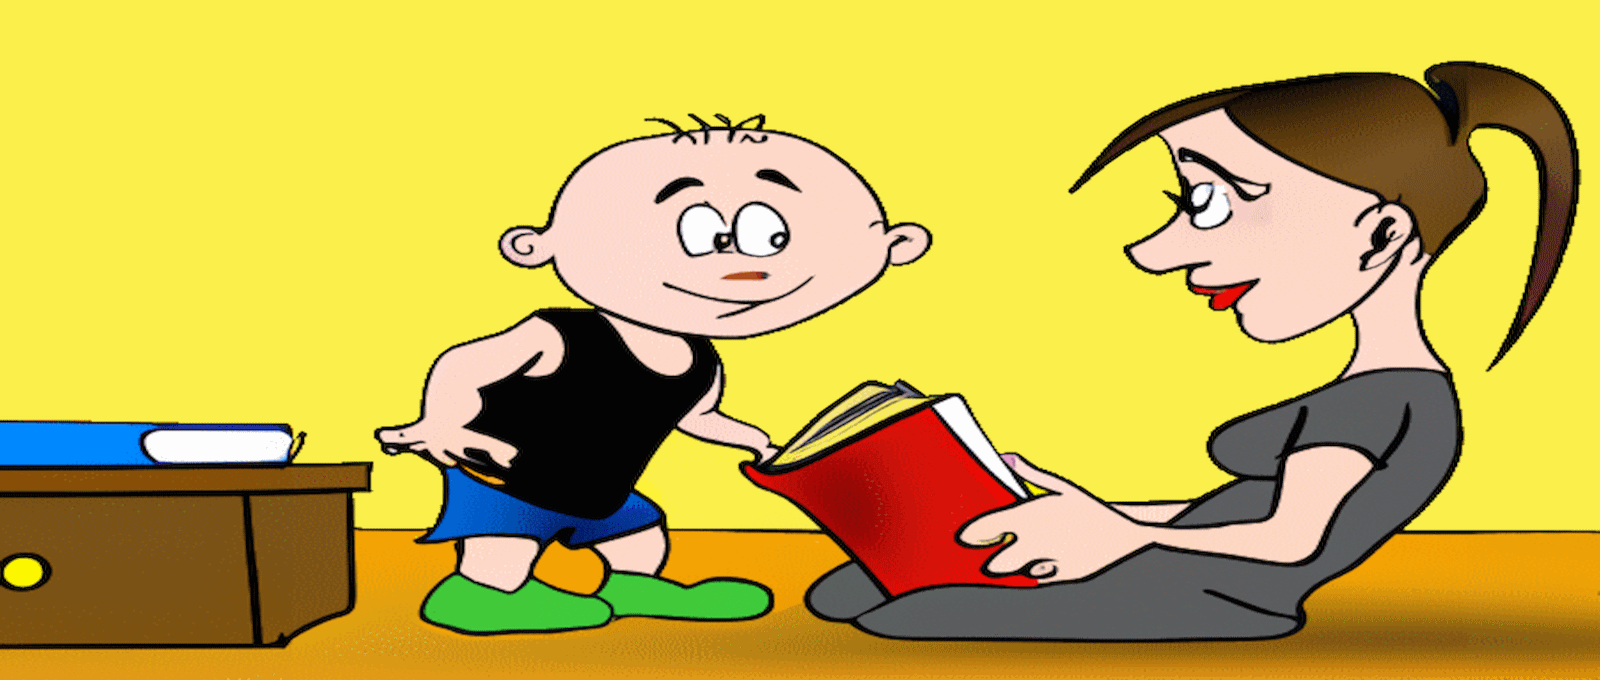 A Cartoon of a Child Learning to Love Reading